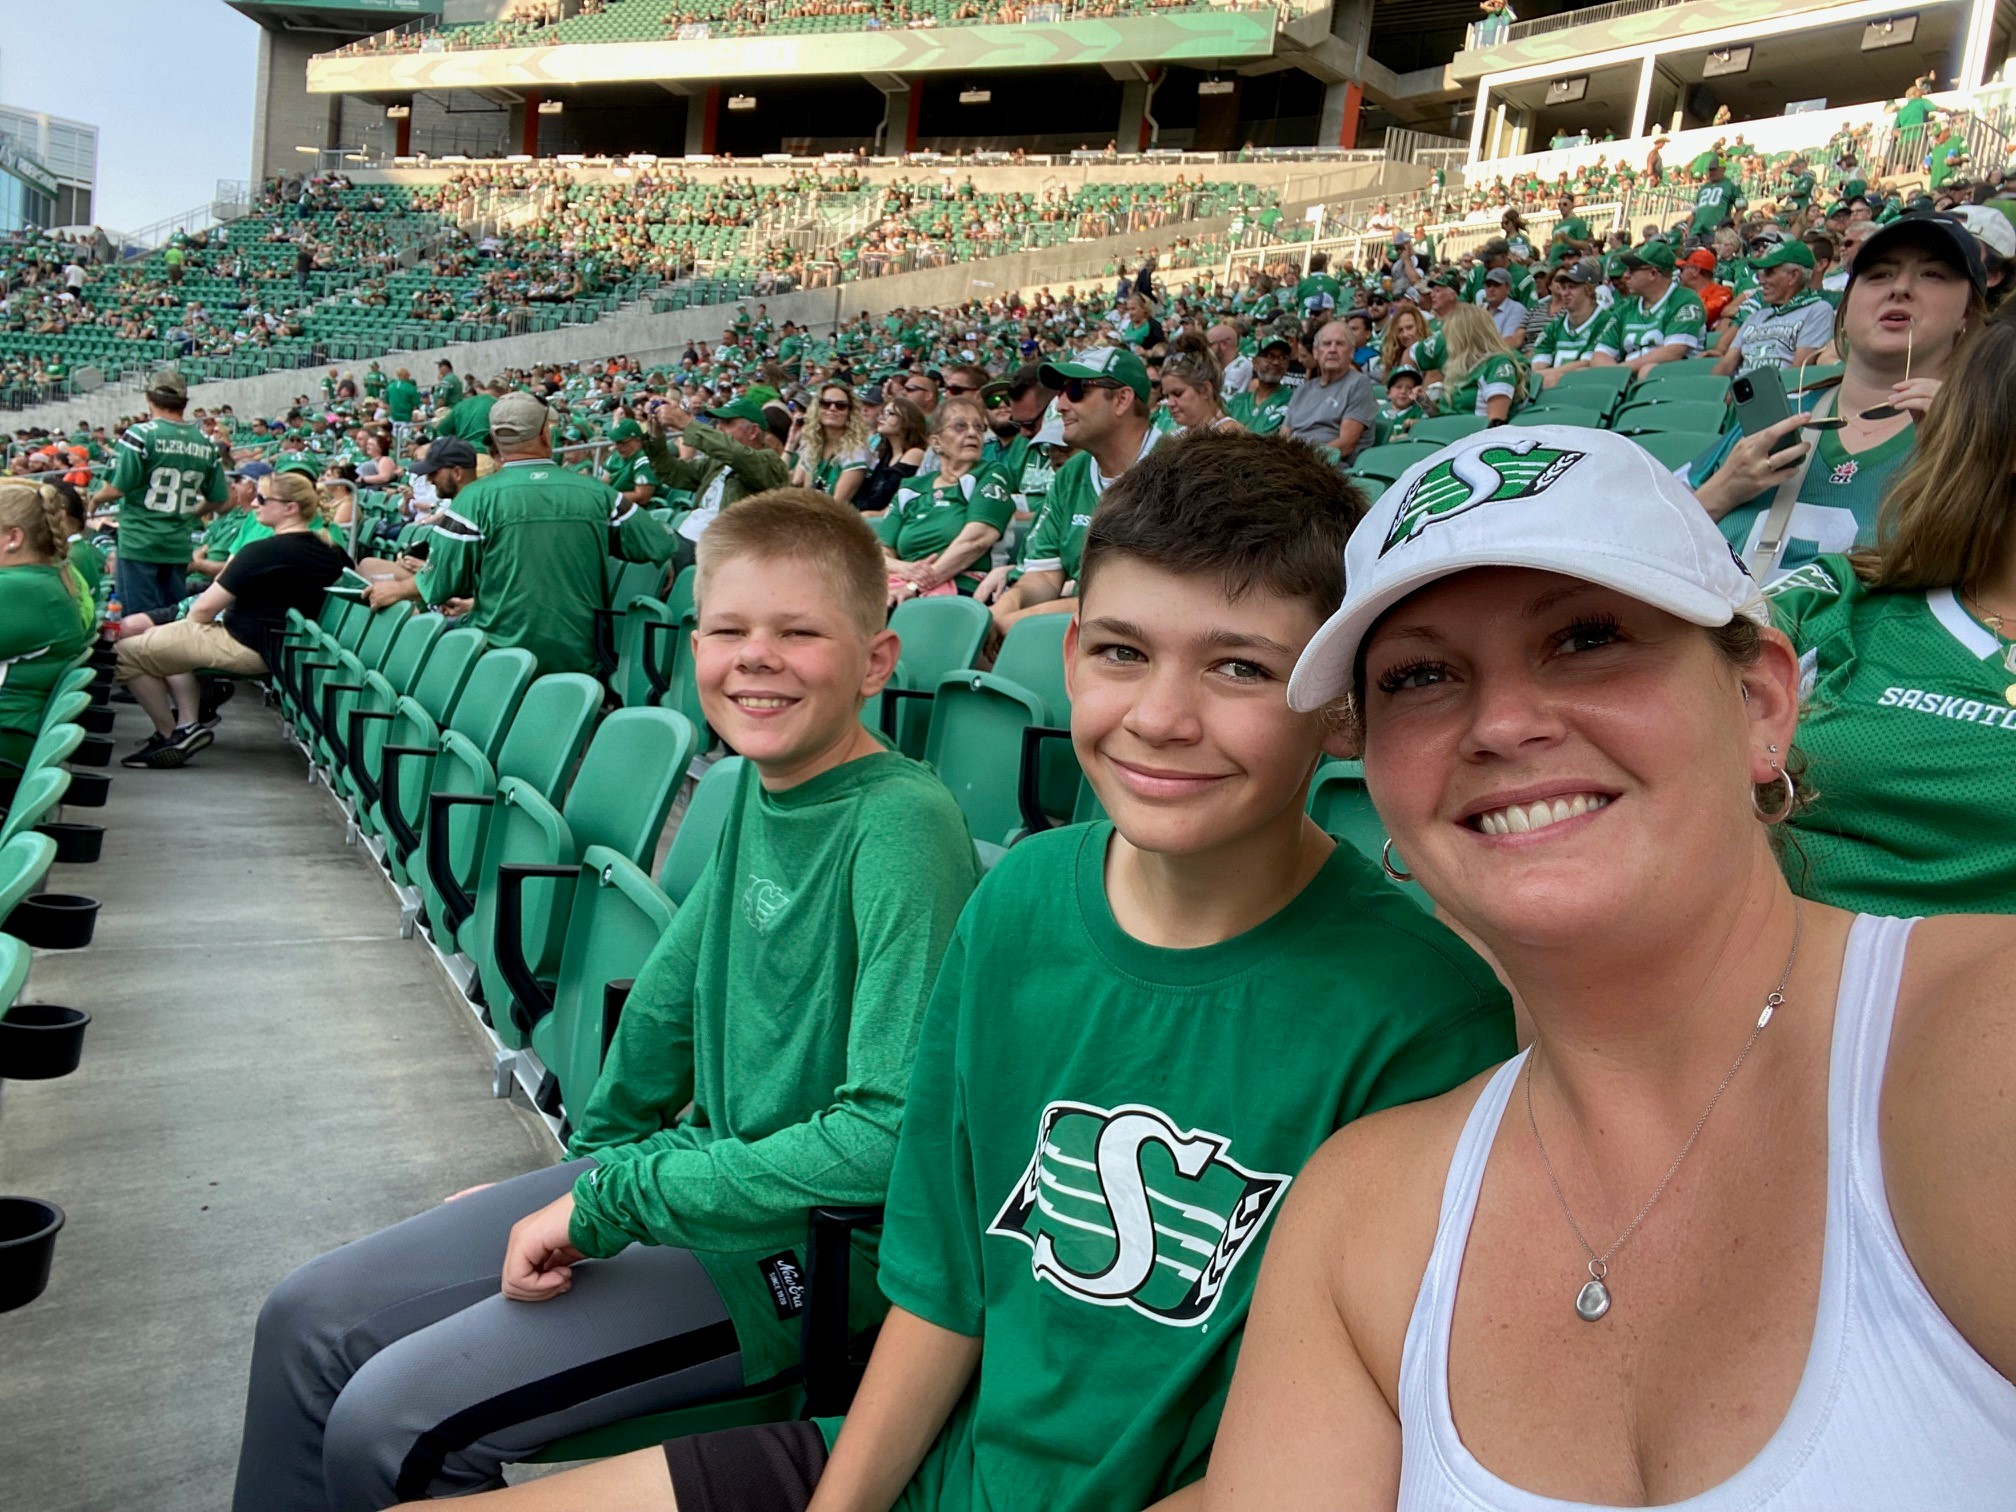 A women on the right with a white Saskatchewan Roughriders ballcap and white tank top, with two boys to the left, wearing green Roughriders shirts, in a stadium with green seats and many people wearing Roughriders merchandise in the background.